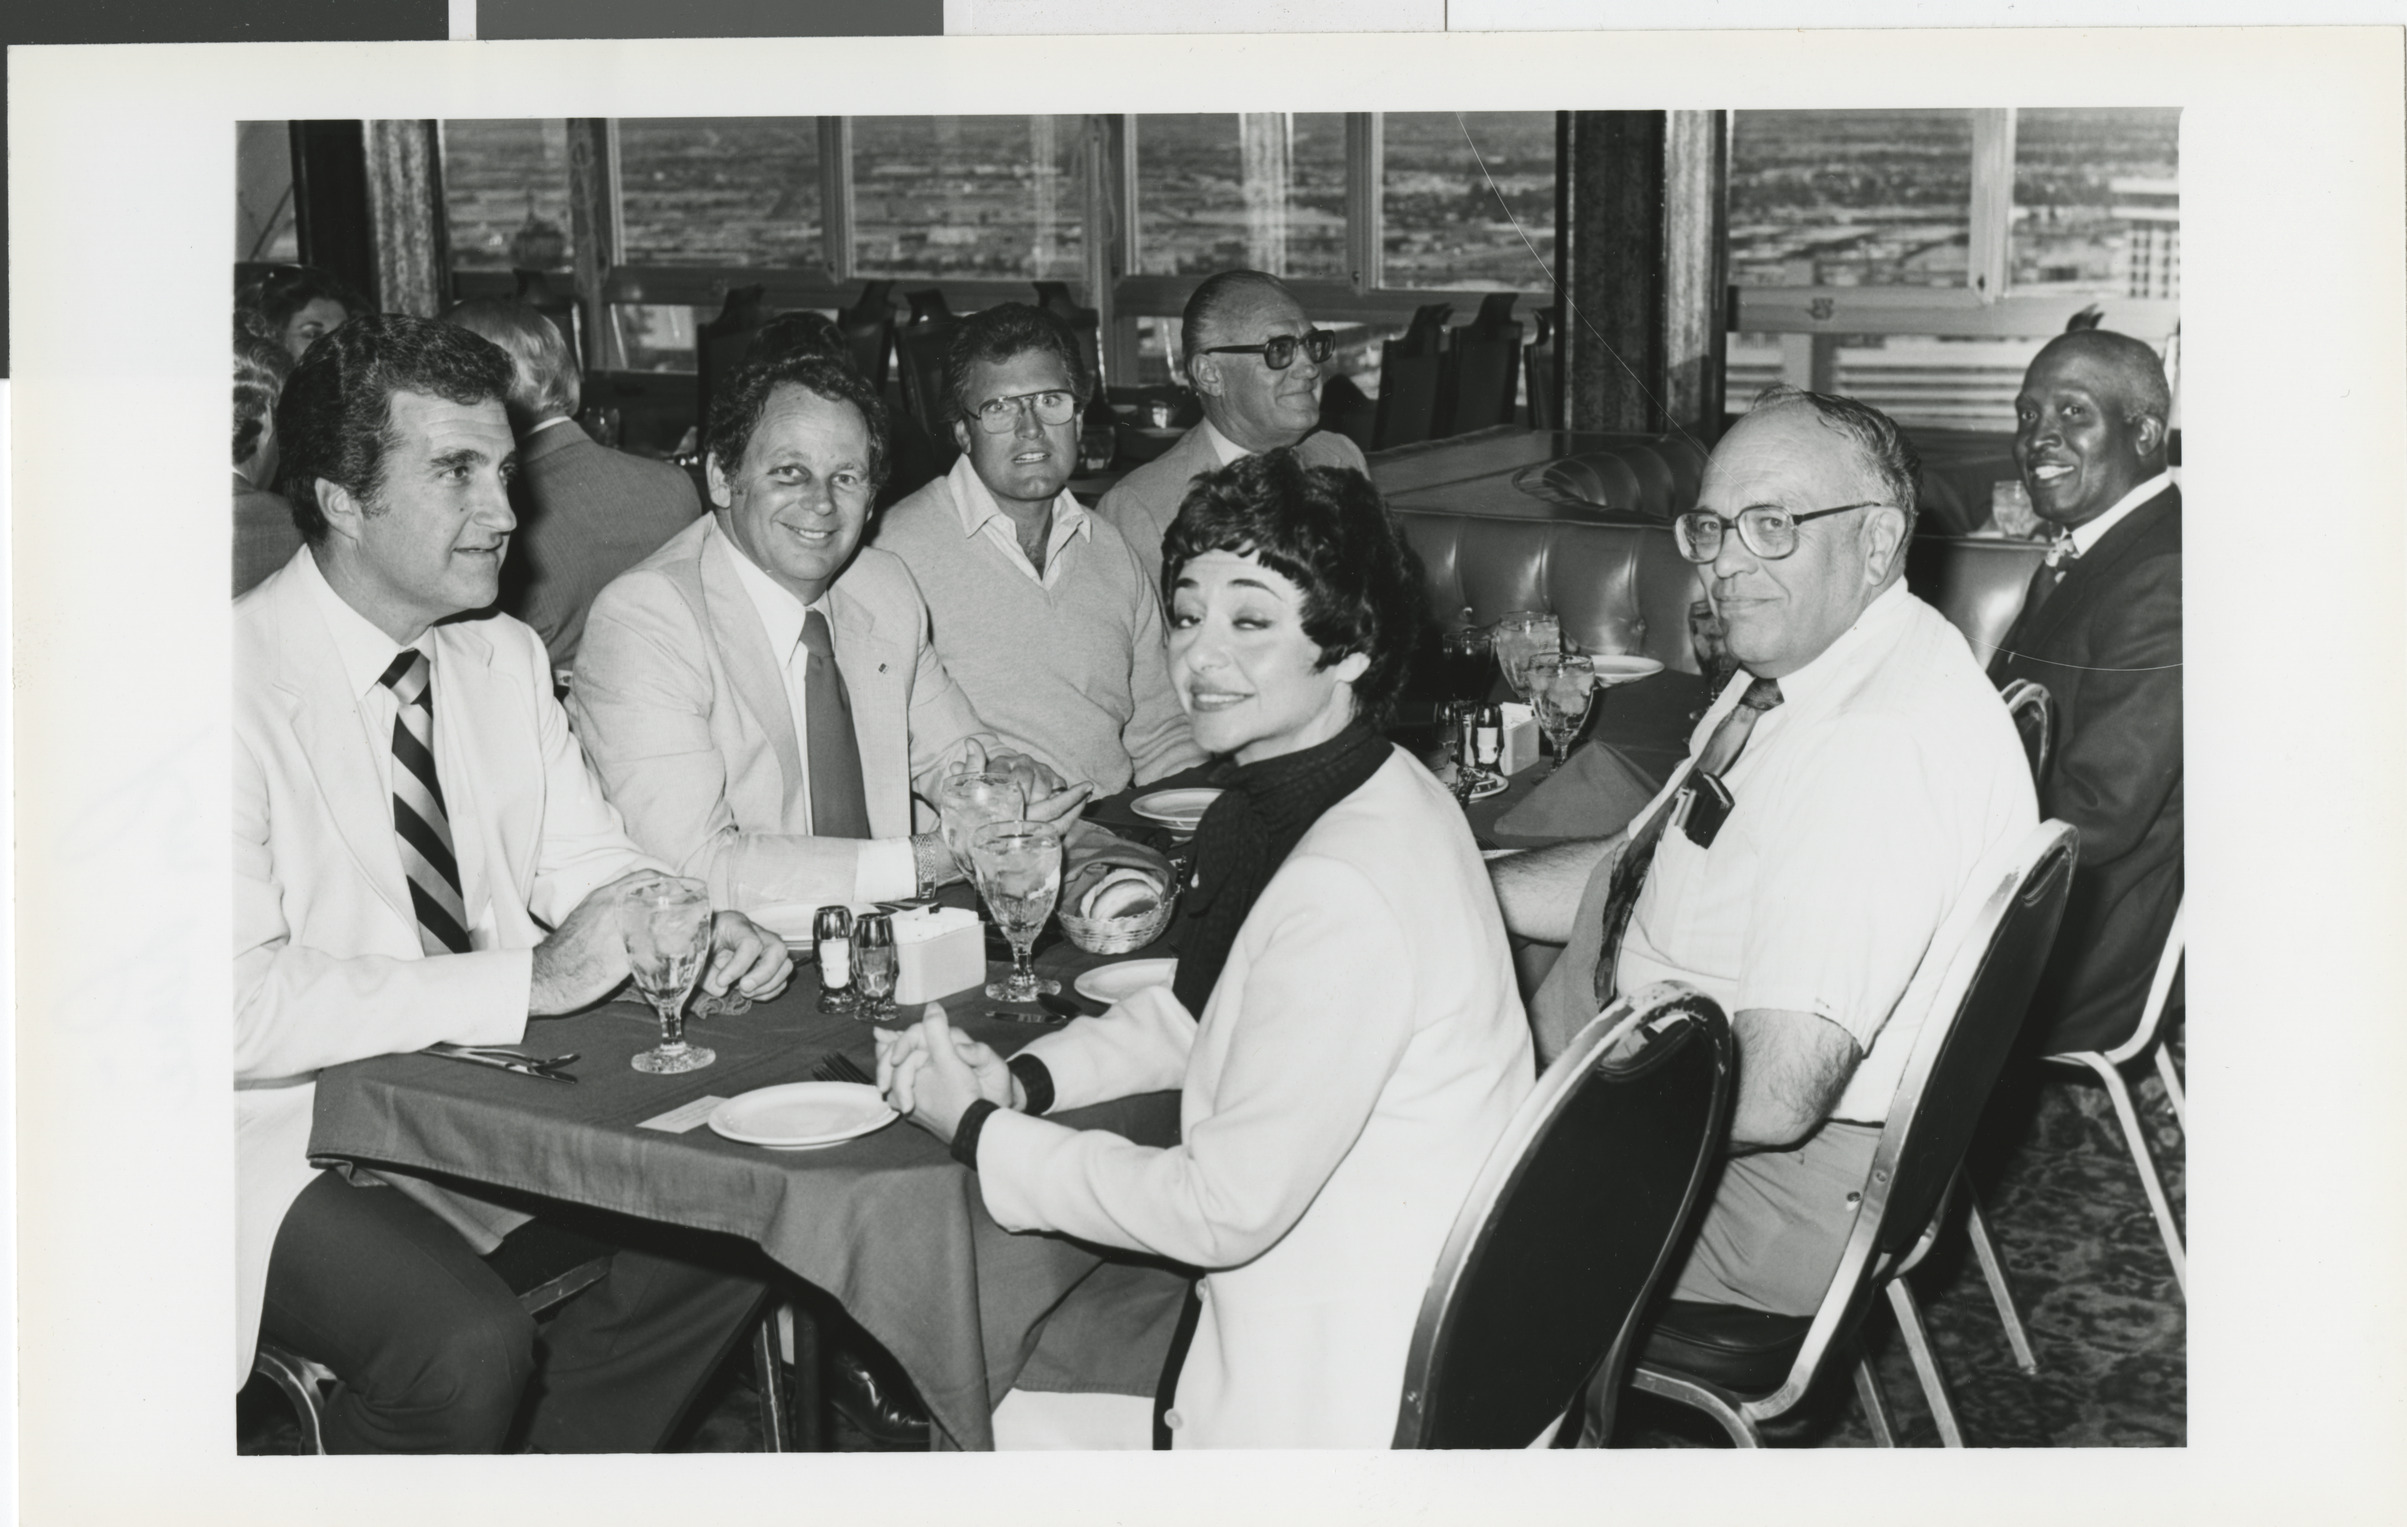 Photograph of Ron Lurie with a group at a restaurant (Woodrow Wilson at far right)